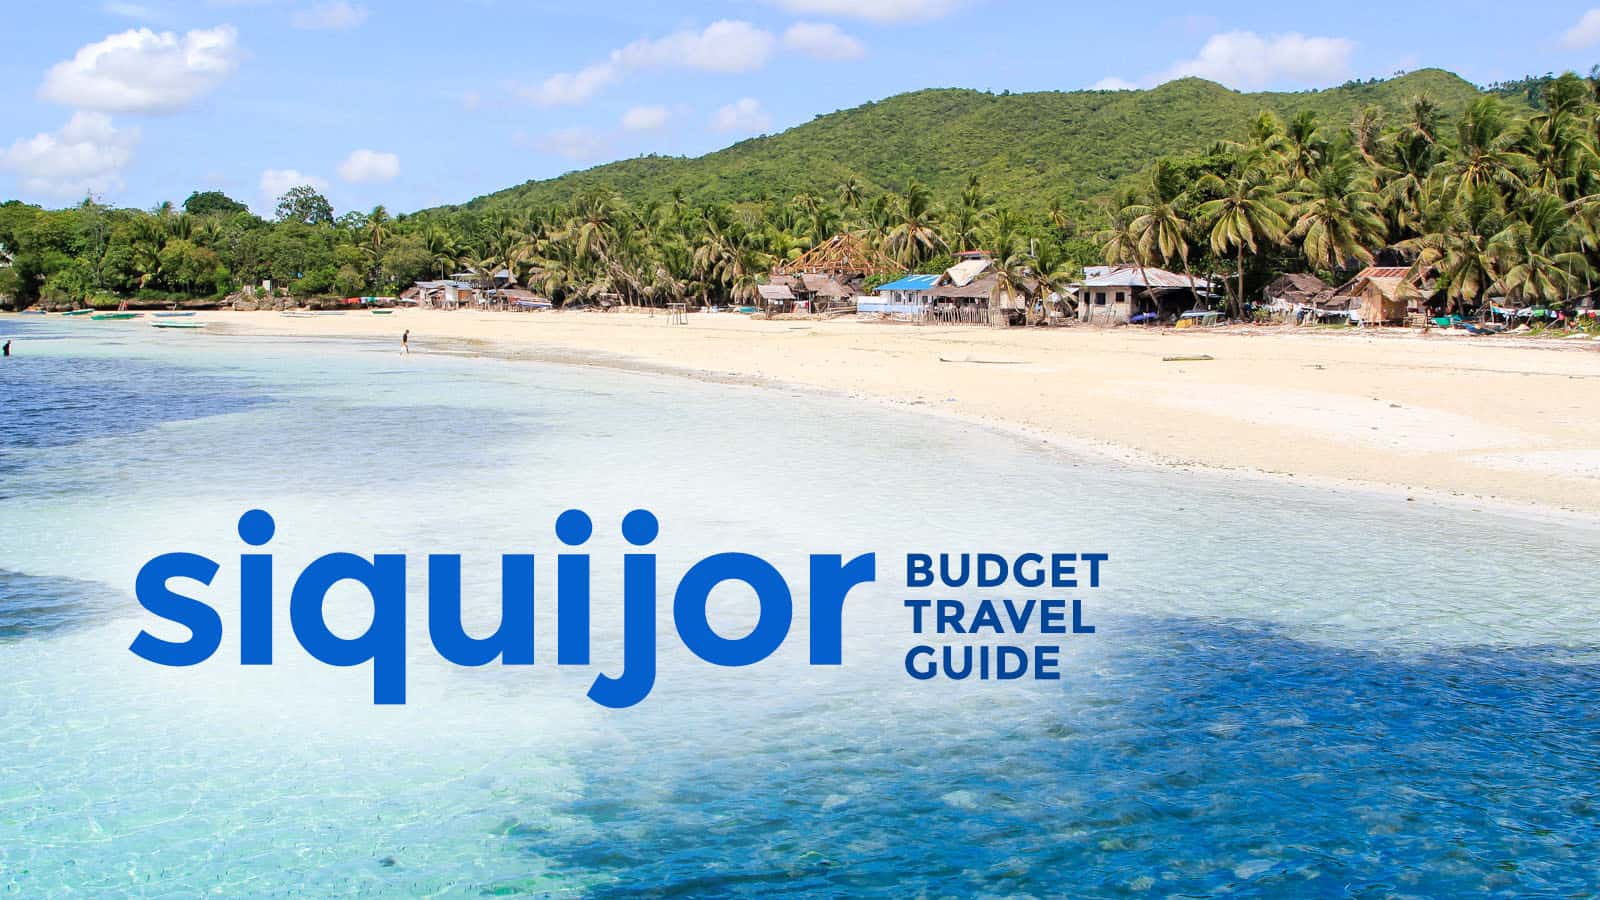 Siquijor On A Budget Travel Guide And Itineraries The Poor Traveler Itinerary Blog